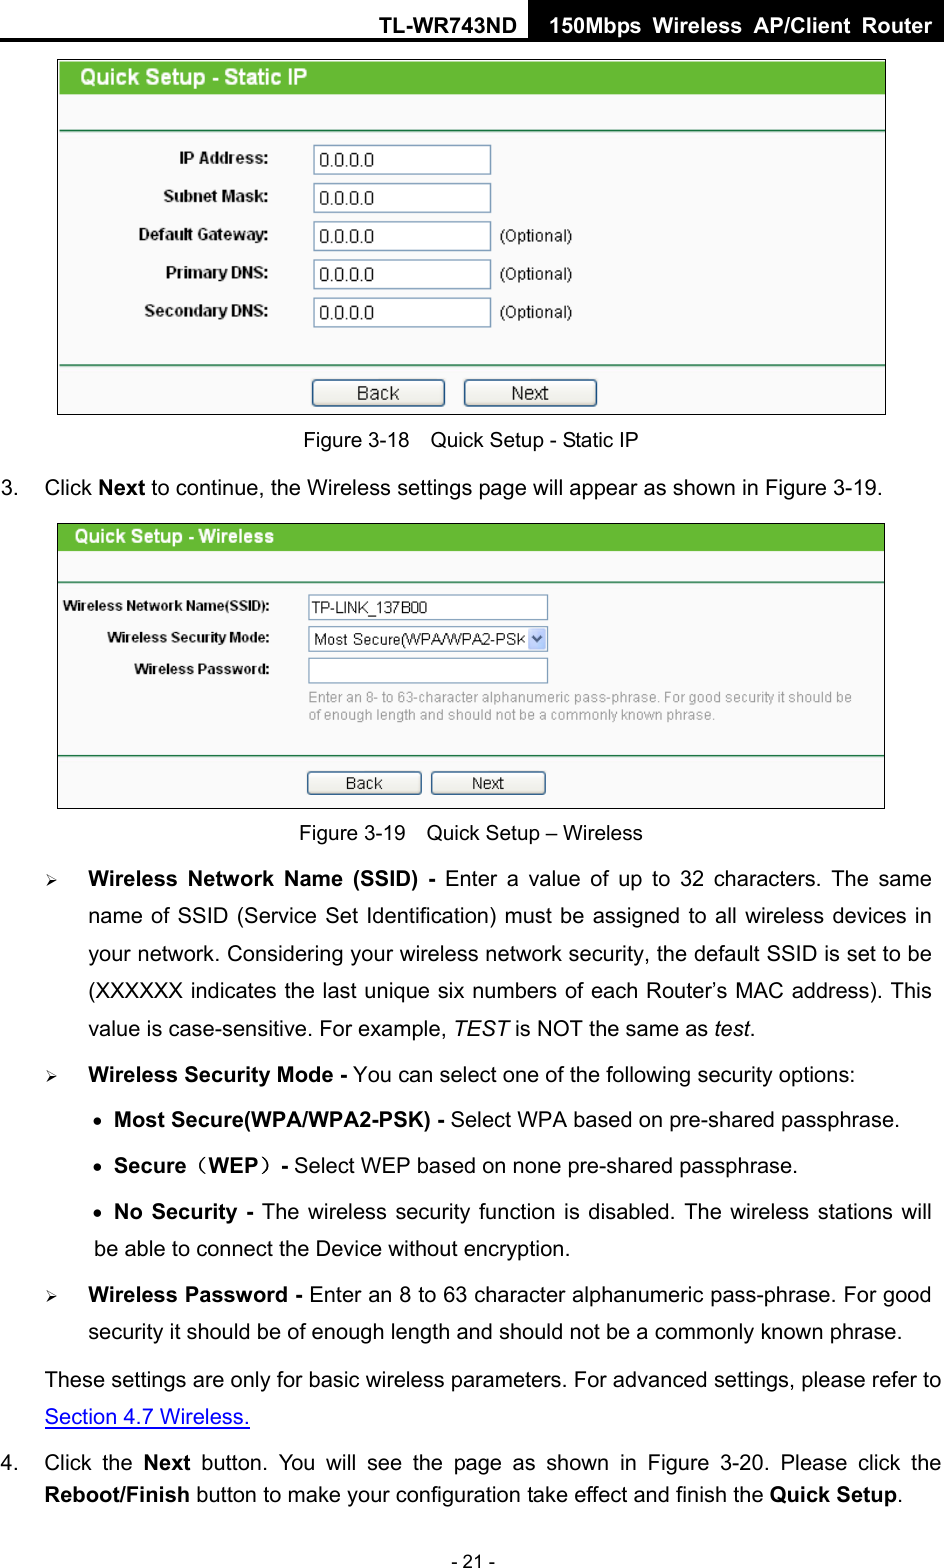 TL-WR743ND 150Mbps Wireless AP/Client Router - 21 -  Figure 3-18    Quick Setup - Static IP 3. Click Next to continue, the Wireless settings page will appear as shown in Figure 3-19.  Figure 3-19    Quick Setup – Wireless  Wireless Network Name (SSID) - Enter a value of up to 32 characters. The same name of SSID (Service Set Identification) must be assigned to all wireless devices in your network. Considering your wireless network security, the default SSID is set to be   (XXXXXX indicates the last unique six numbers of each Router’s MAC address). This value is case-sensitive. For example, TEST is NOT the same as test.  Wireless Security Mode - You can select one of the following security options:  Most Secure(WPA/WPA2-PSK) - Select WPA based on pre-shared passphrase.    Secure（WEP）- Select WEP based on none pre-shared passphrase.    No Security - The wireless security function is disabled. The wireless stations will             be able to connect the Device without encryption.    Wireless Password - Enter an 8 to 63 character alphanumeric pass-phrase. For good security it should be of enough length and should not be a commonly known phrase. These settings are only for basic wireless parameters. For advanced settings, please refer to Section 4.7 Wireless.  4. Click the Next button. You will see the page as shown in Figure 3-20. Please click the Reboot/Finish button to make your configuration take effect and finish the Quick Setup.  